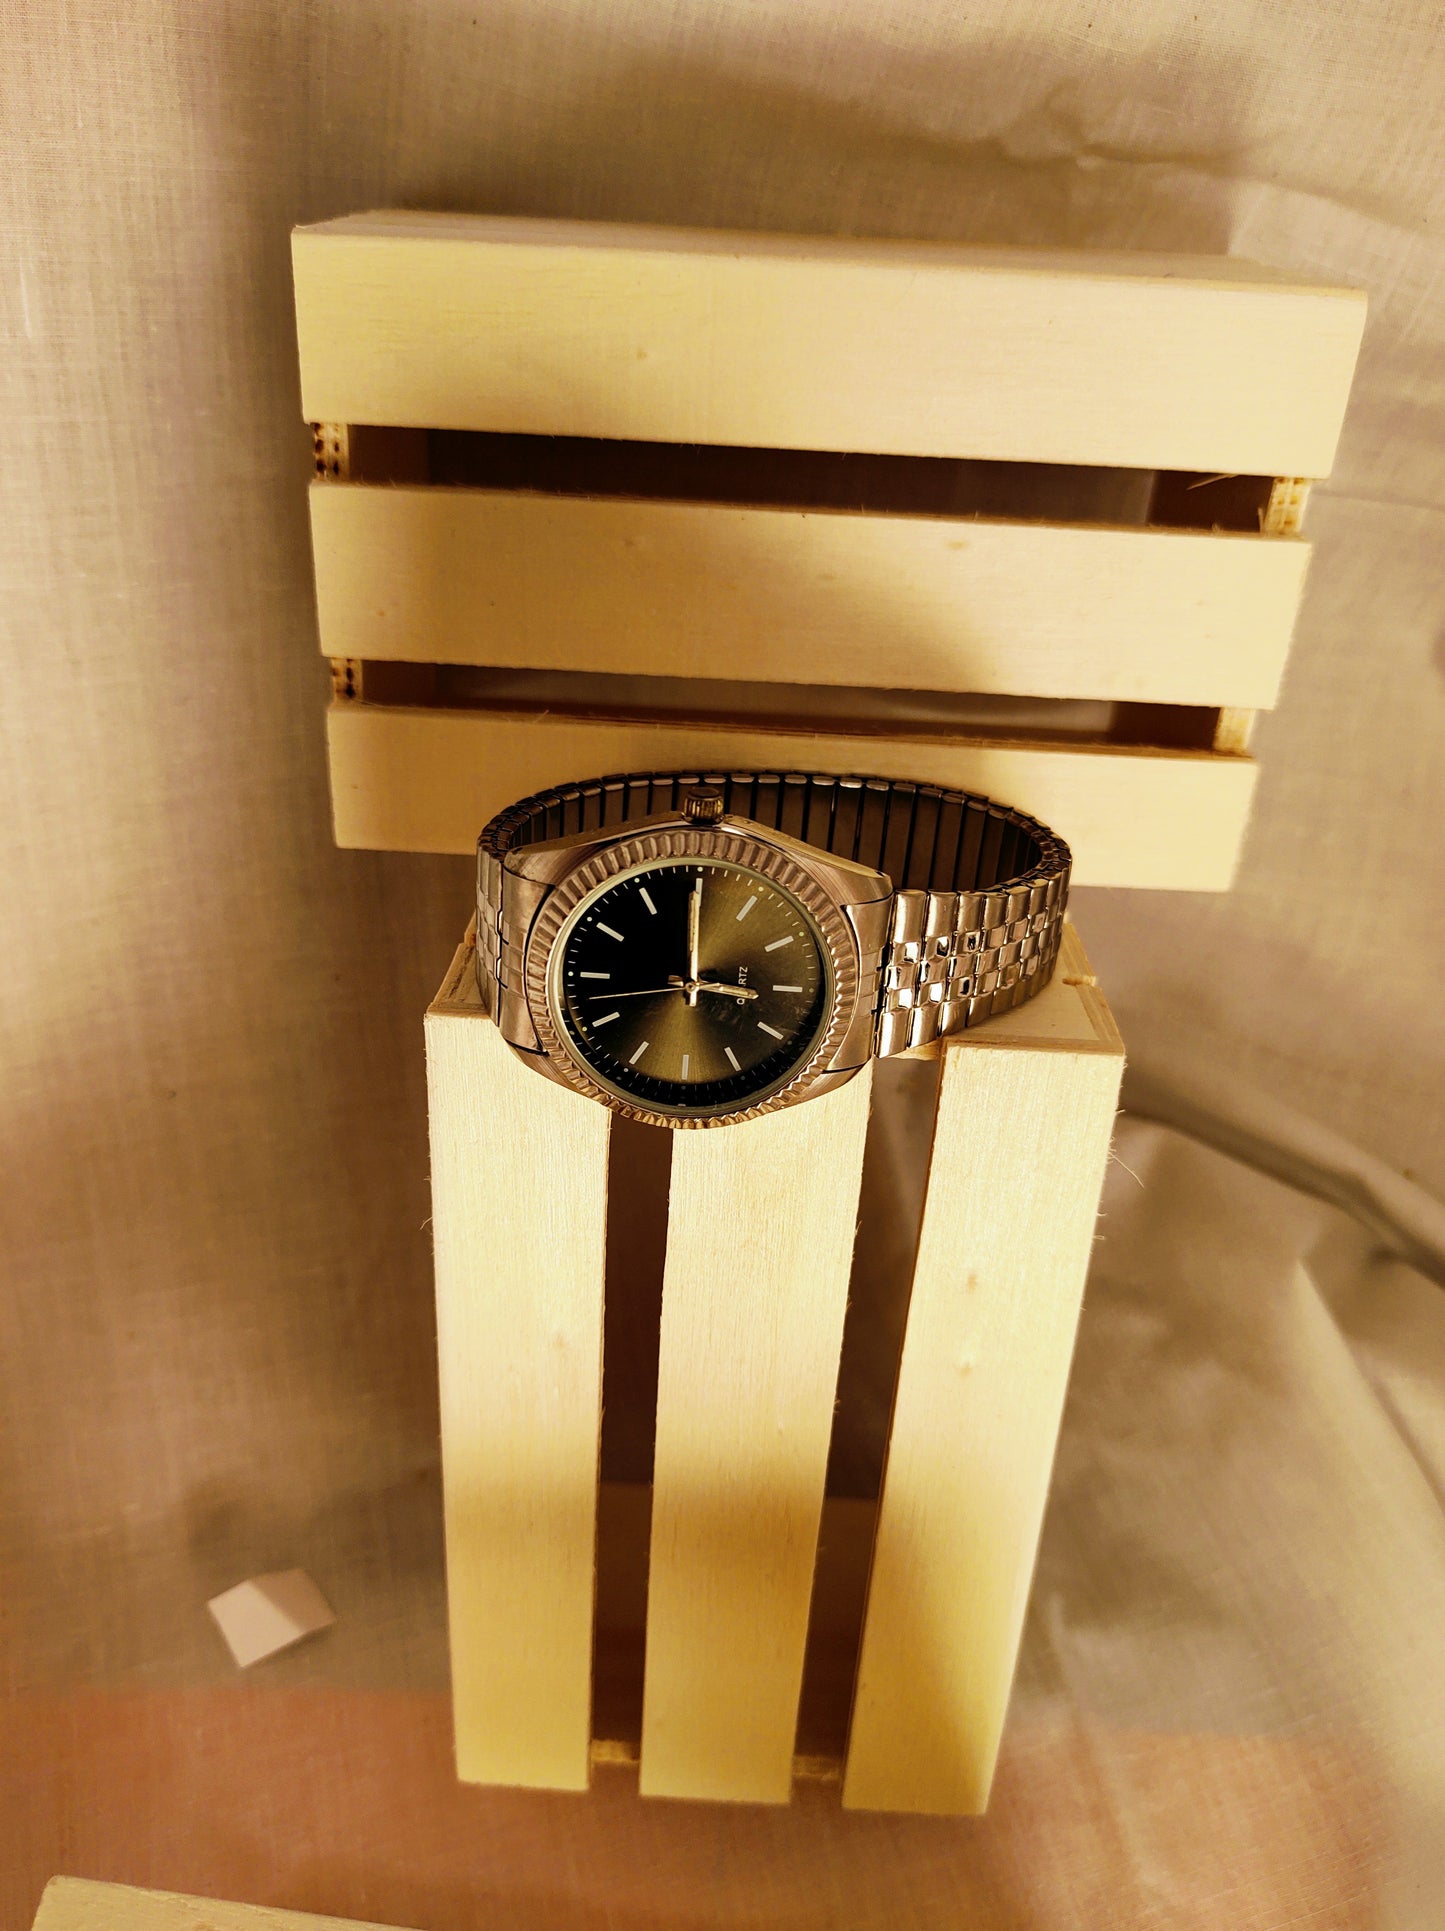 Simple Quartz men's watch stainless case and band ..some pitting on back but run well..